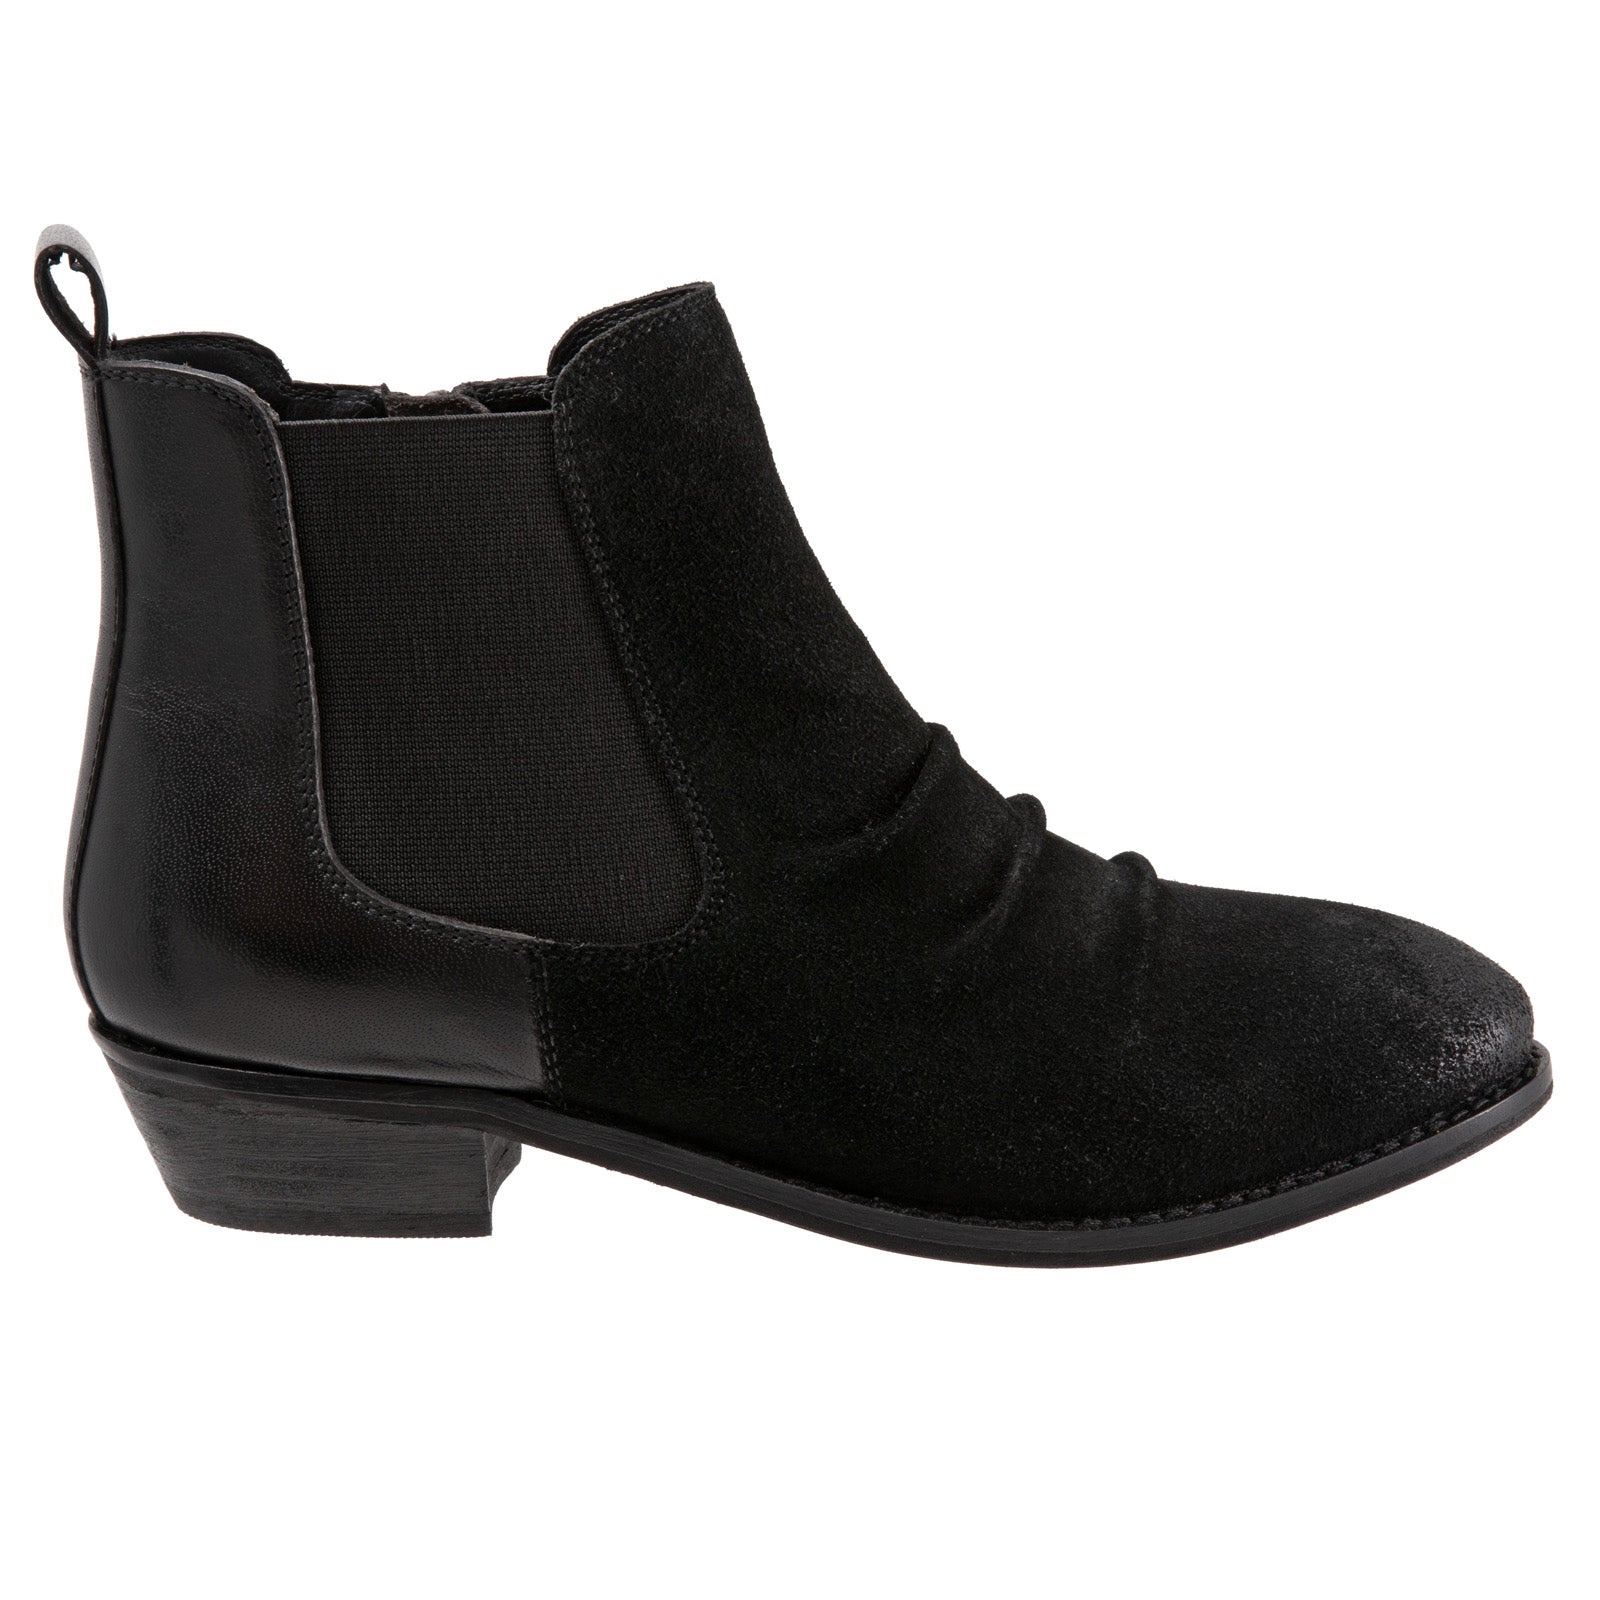 Softwalk Rockford S2058-003 Womens Black Wide Suede Ankle & Booties Boots